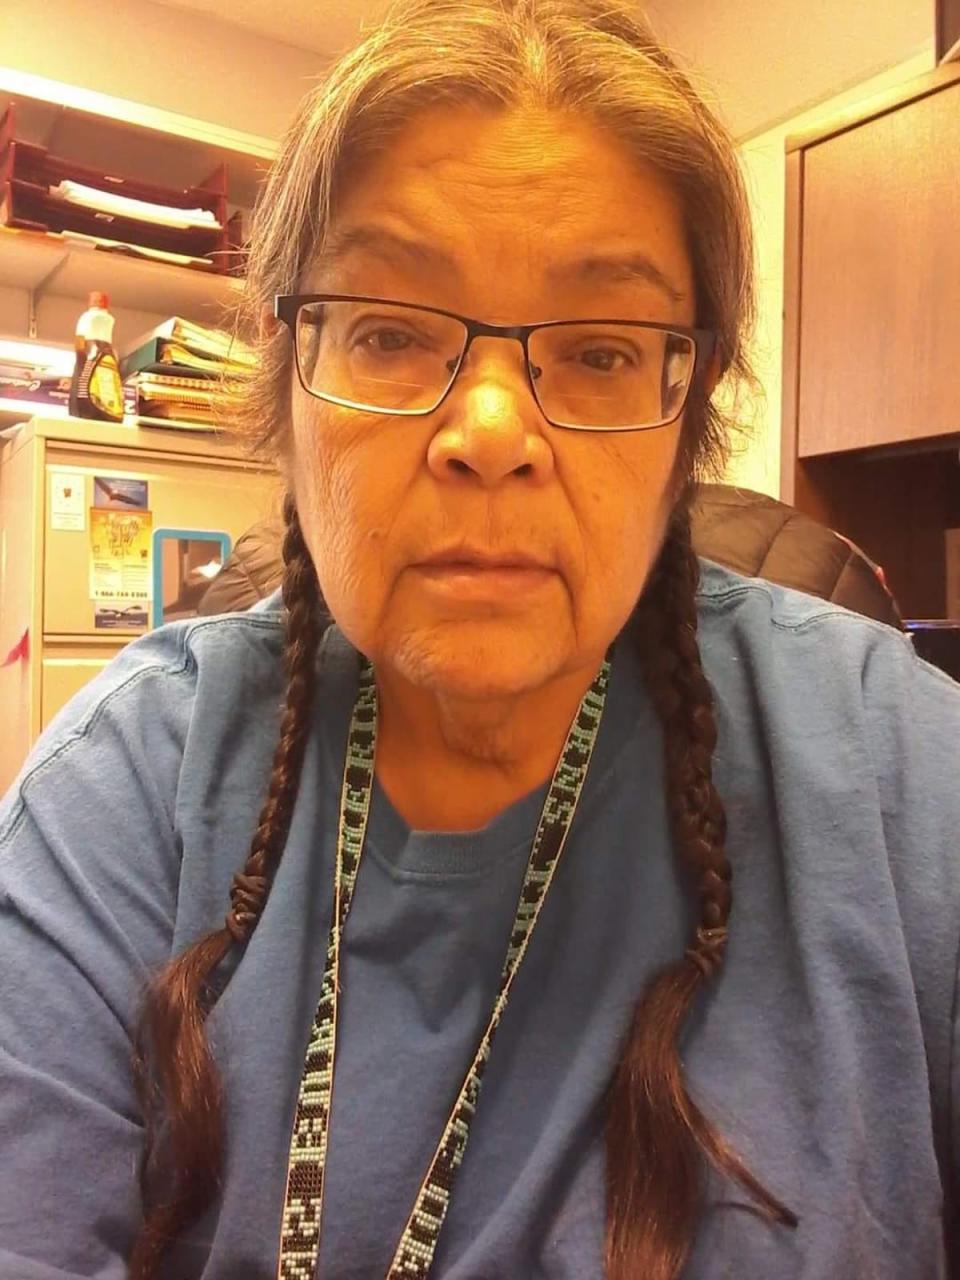 Lydia “Gloria” Burns, 61, died on James Smith Cree Nation acting a first responder during the spate of stabbing attacks that took place in northern Saskatchewan on 4 September 2022 (RCMP)